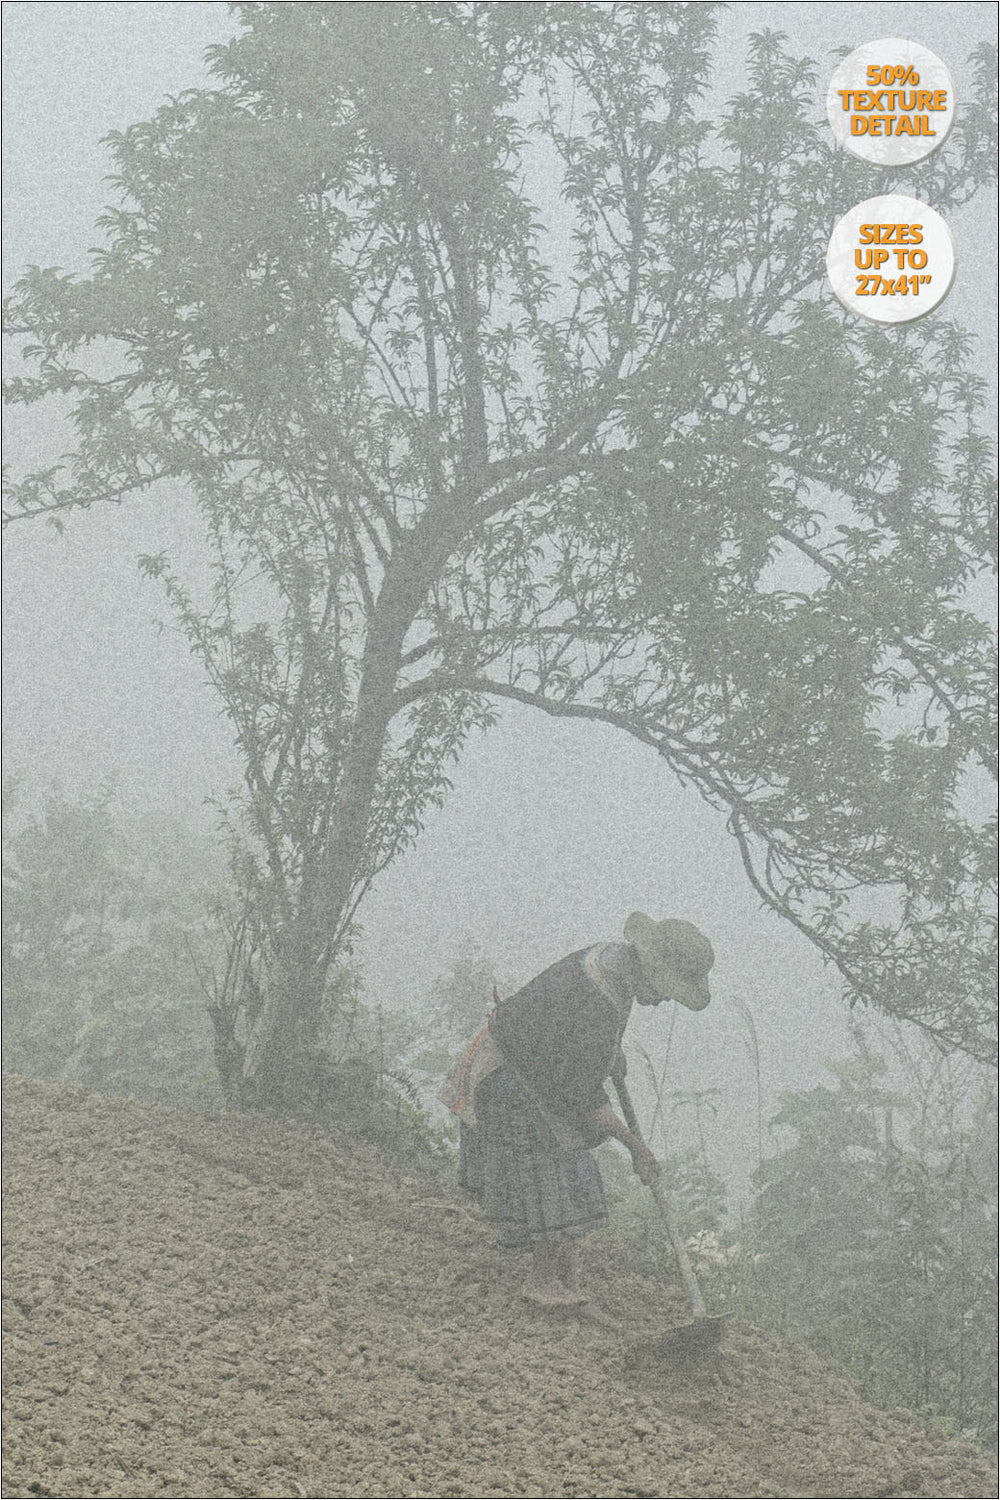 Hmong woman sowing in the fog, Bac Ha, Vietnam. | 50% Magnification Detail.